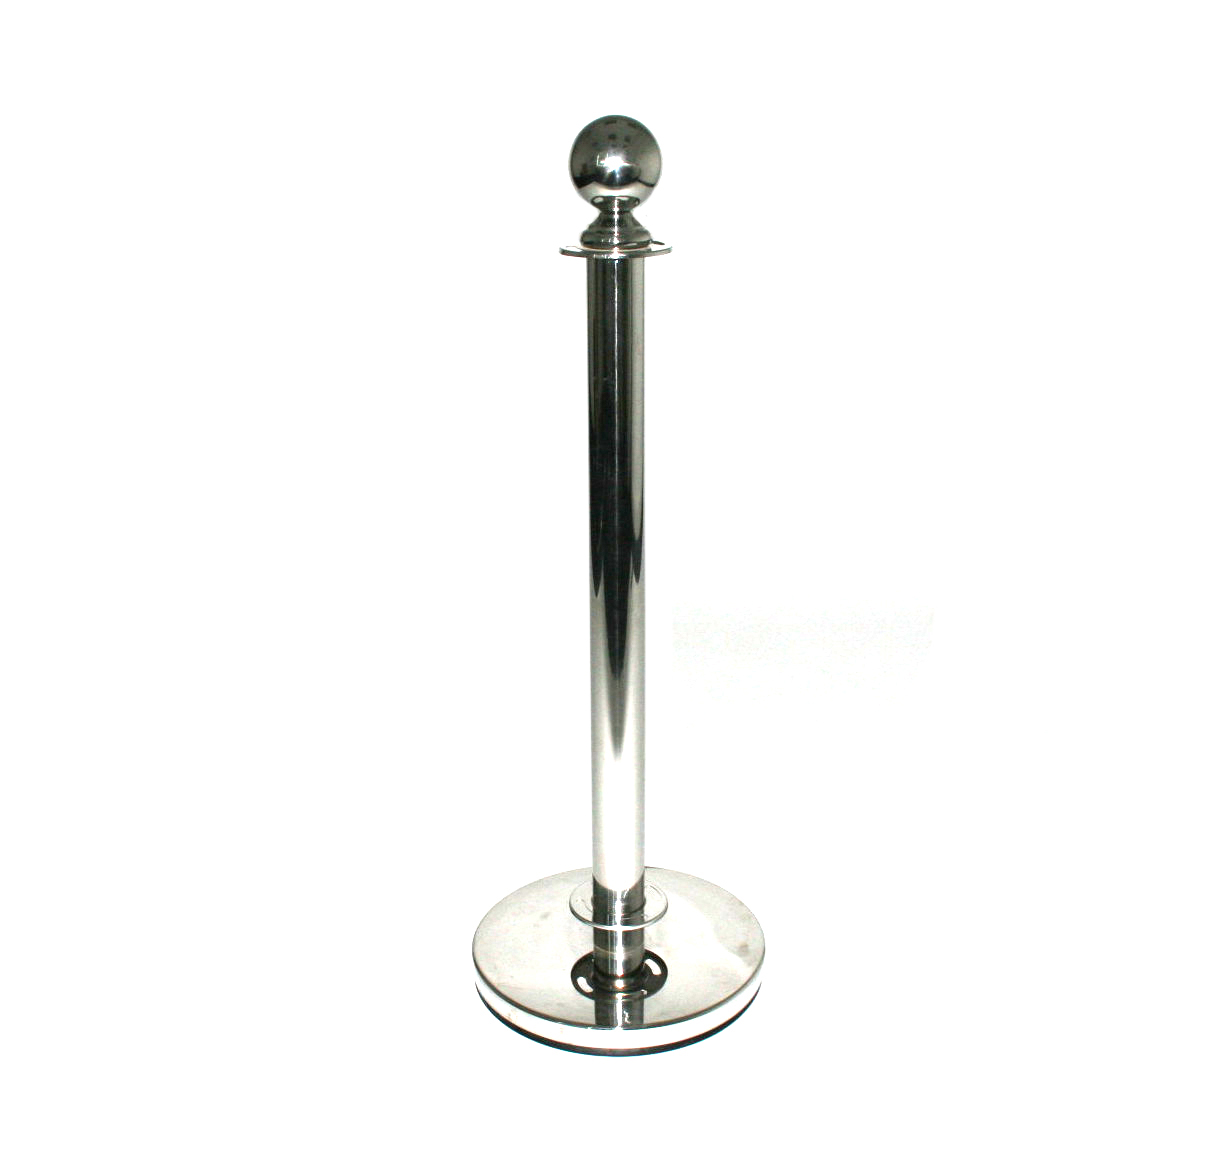 Weighted Cafe Barrier Upright Posts - Barrier Posts - BE Furniture Sales